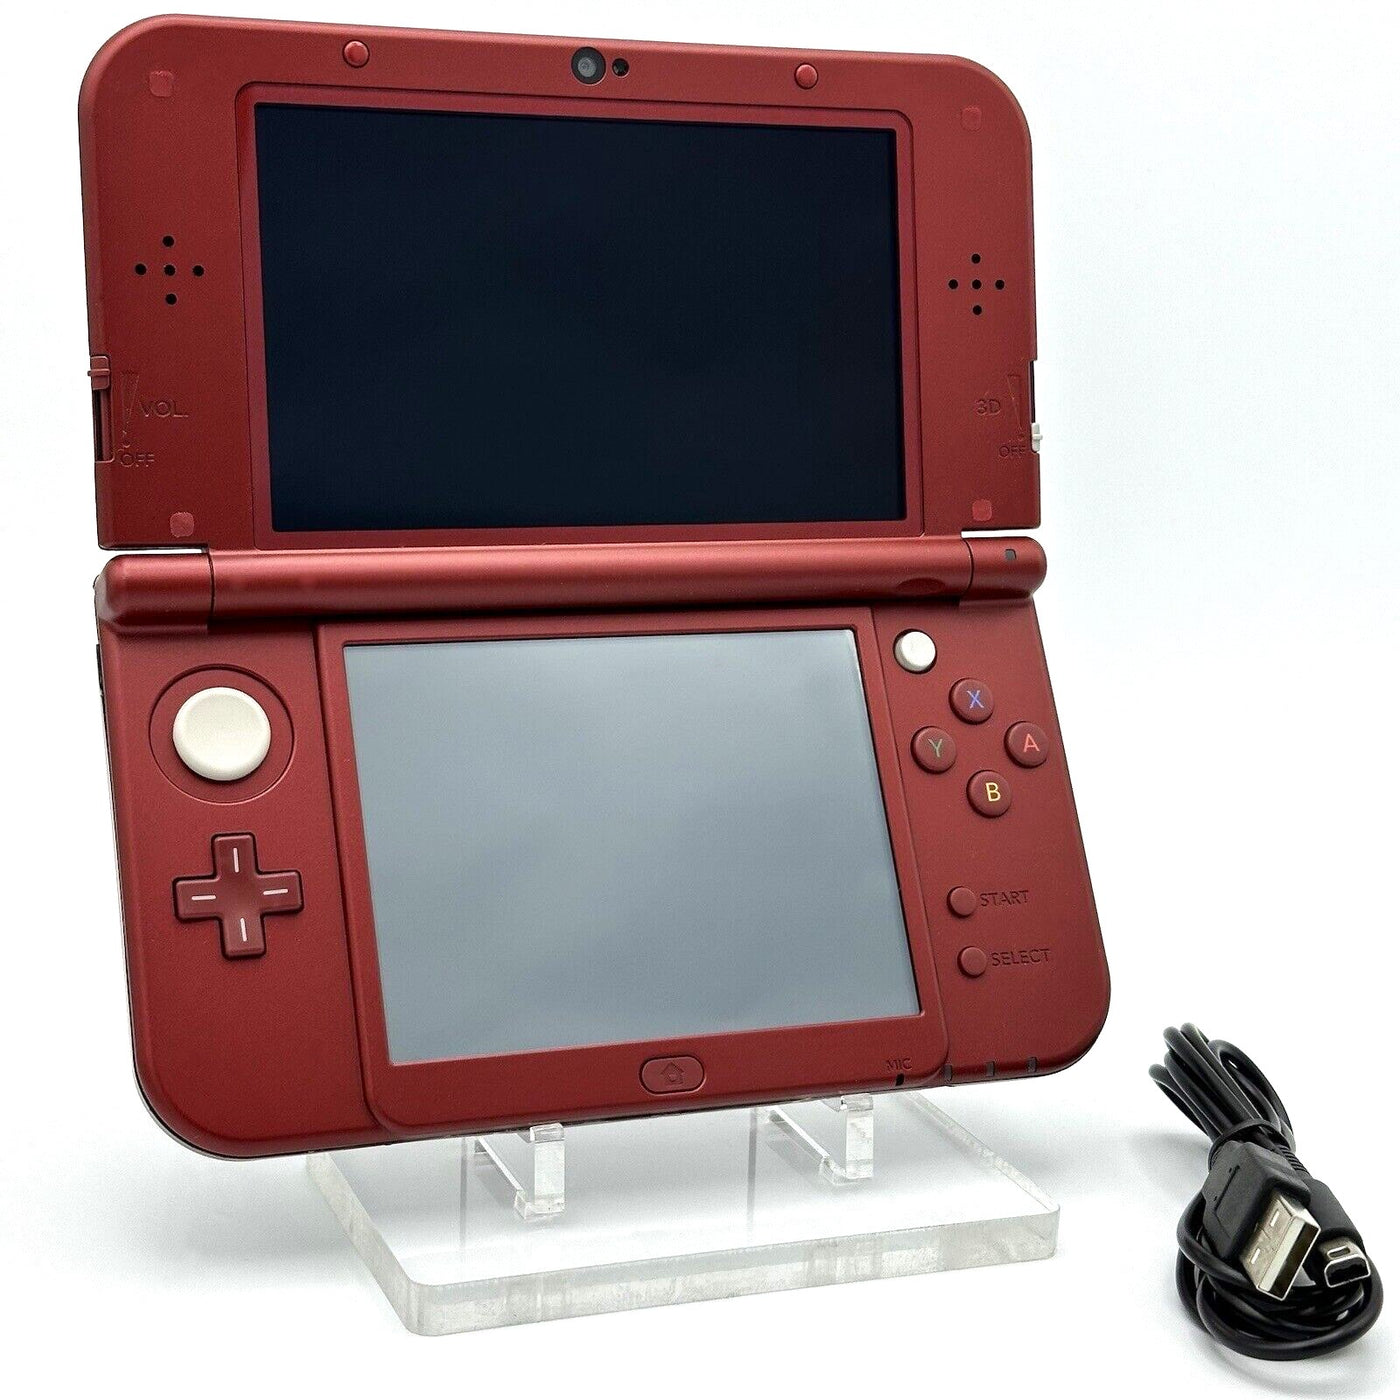 Nintendo New 3DS XL Console - Metallic Red - Refurbished